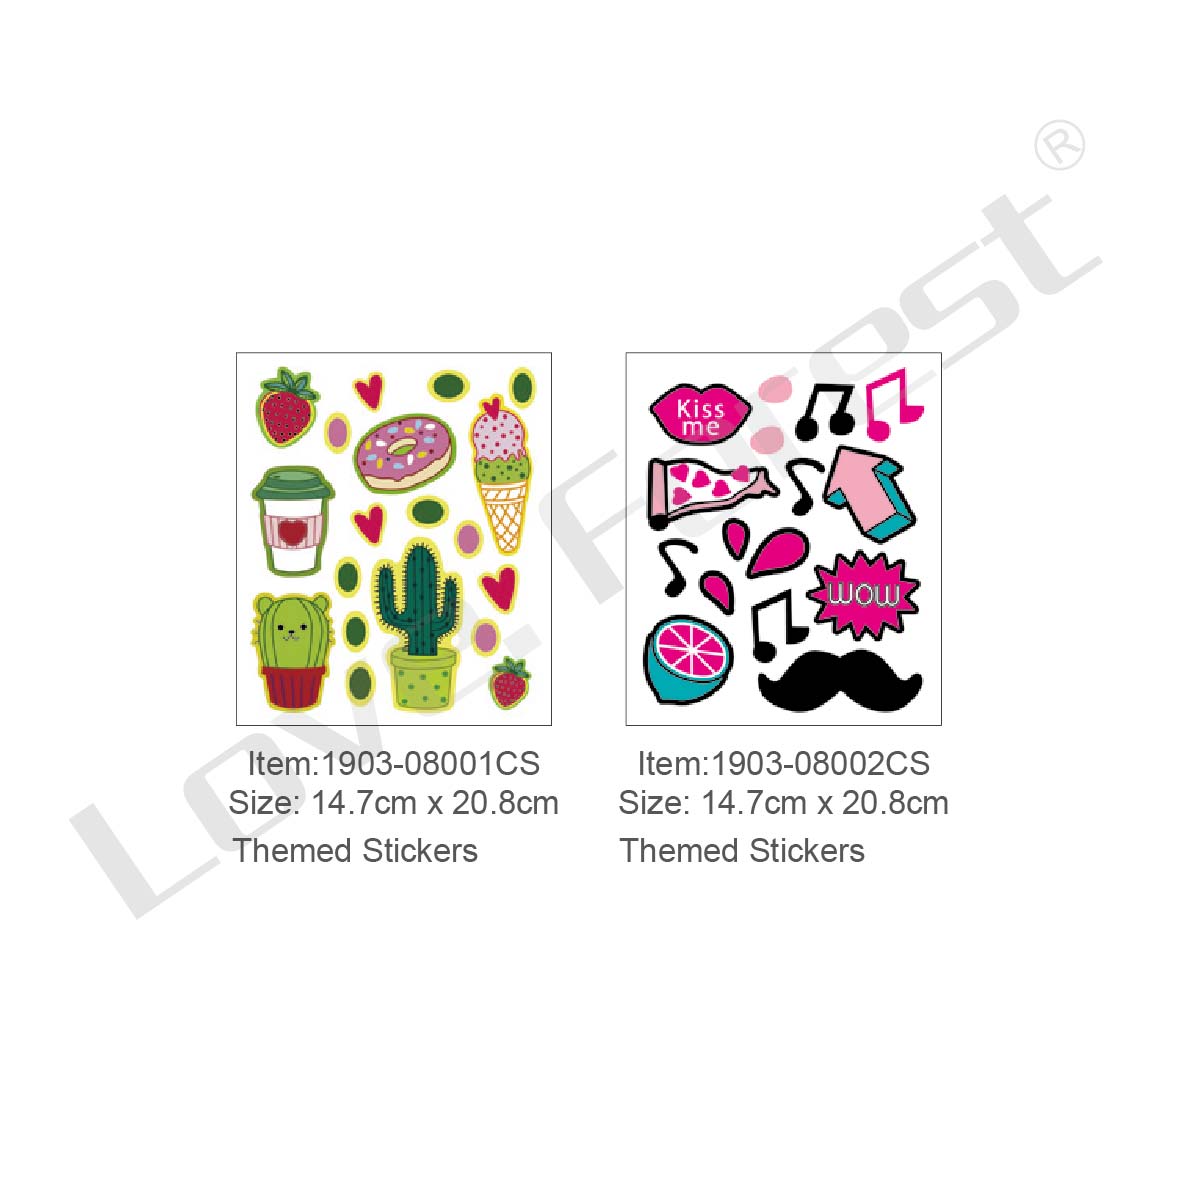 THEMED STICKERS